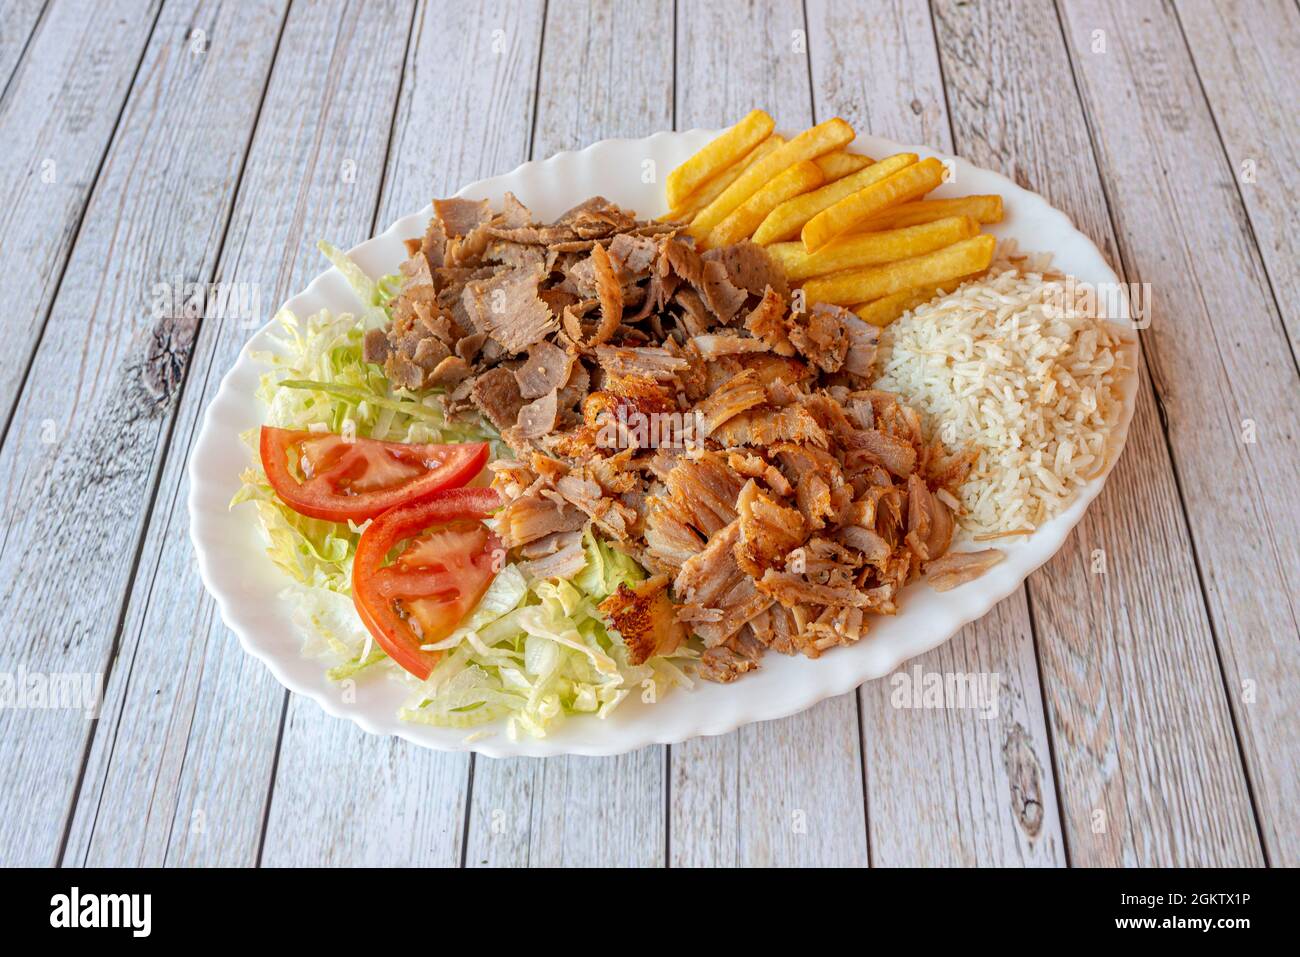 Kebab tray with mixed roast chicken and lamb meat garnished with white rice,  French fries and lettuce and tomato salad Stock Photo - Alamy